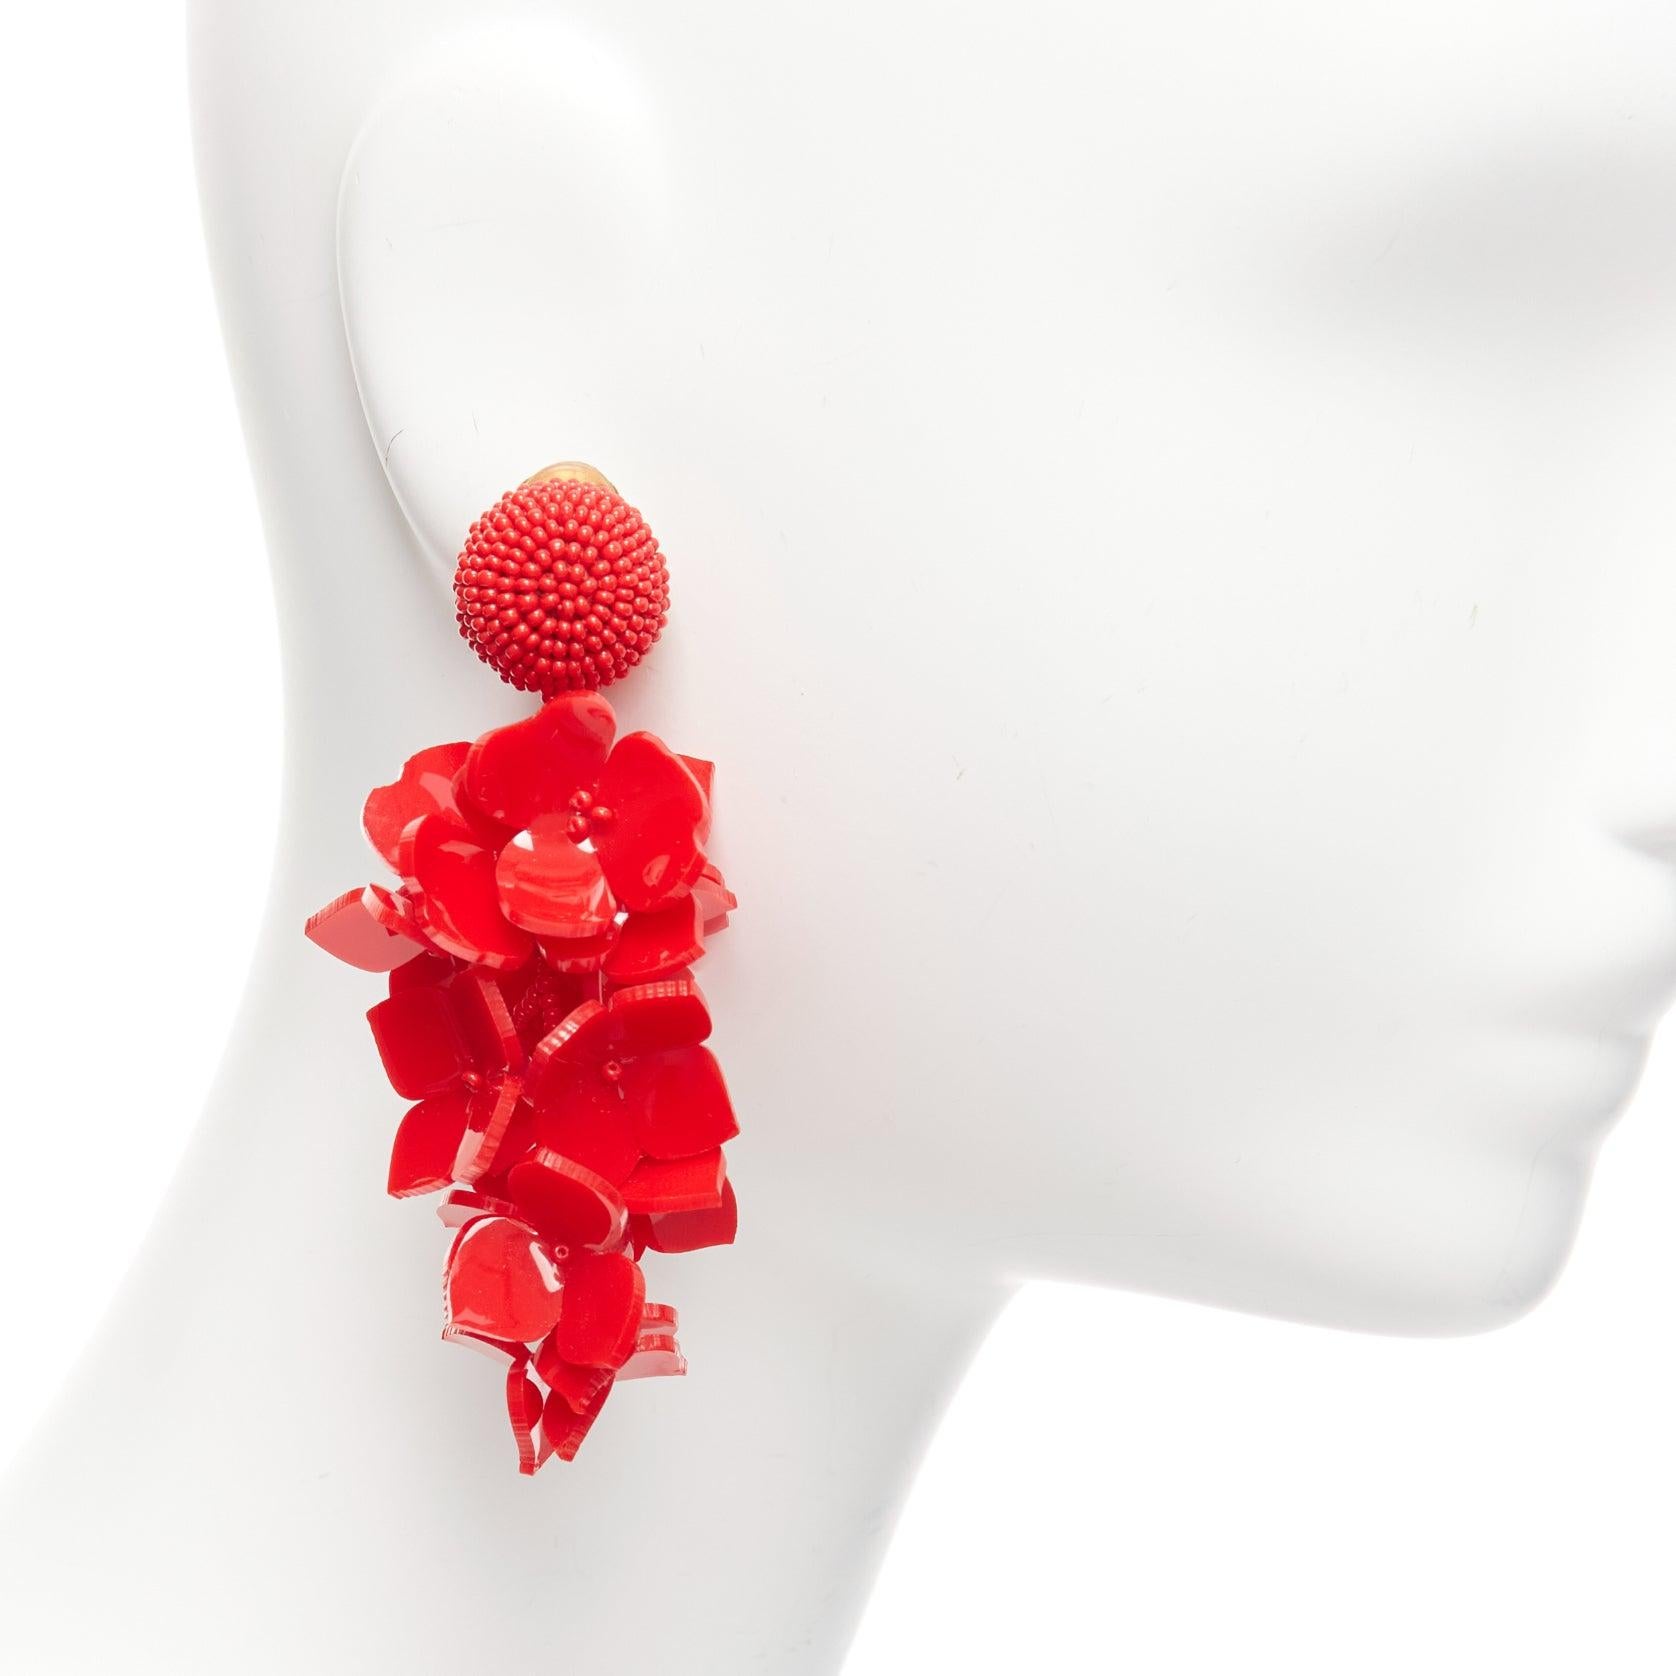 OSCAR DE LA RENTA red acrylic Wisteria flower petals beaded dangling clip on earrings pair
Reference: AAWC/A00912
Brand: Oscar de la Renta
Material: Acrylic, Metal
Color: Red, Gold
Pattern: Solid
Closure: Clip On
Lining: Gold Metal
Made in: